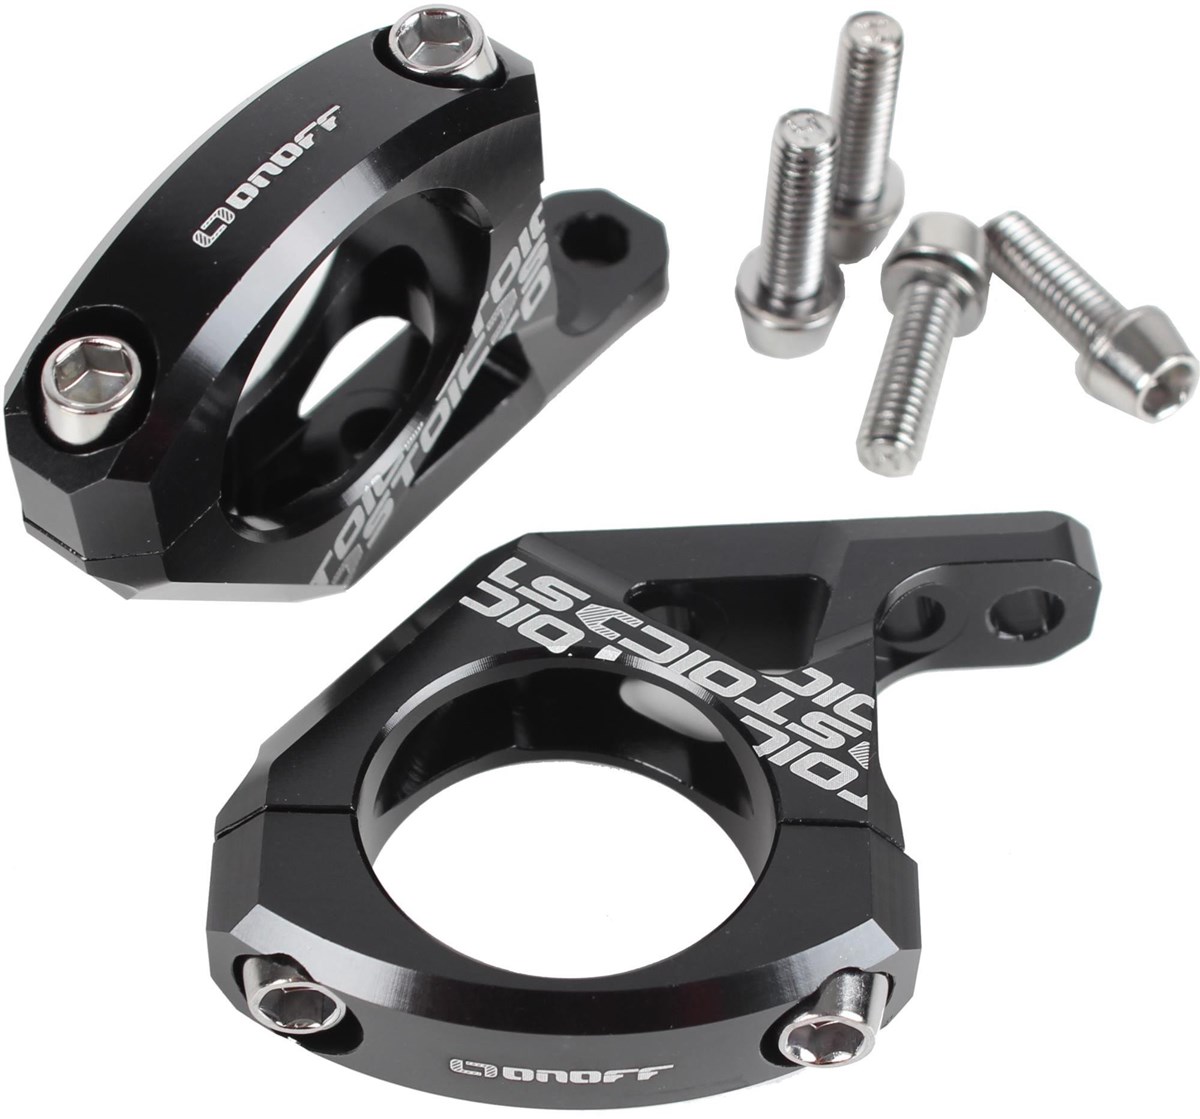 Mondraker OnOff Stoic DH Integrated Stem product image